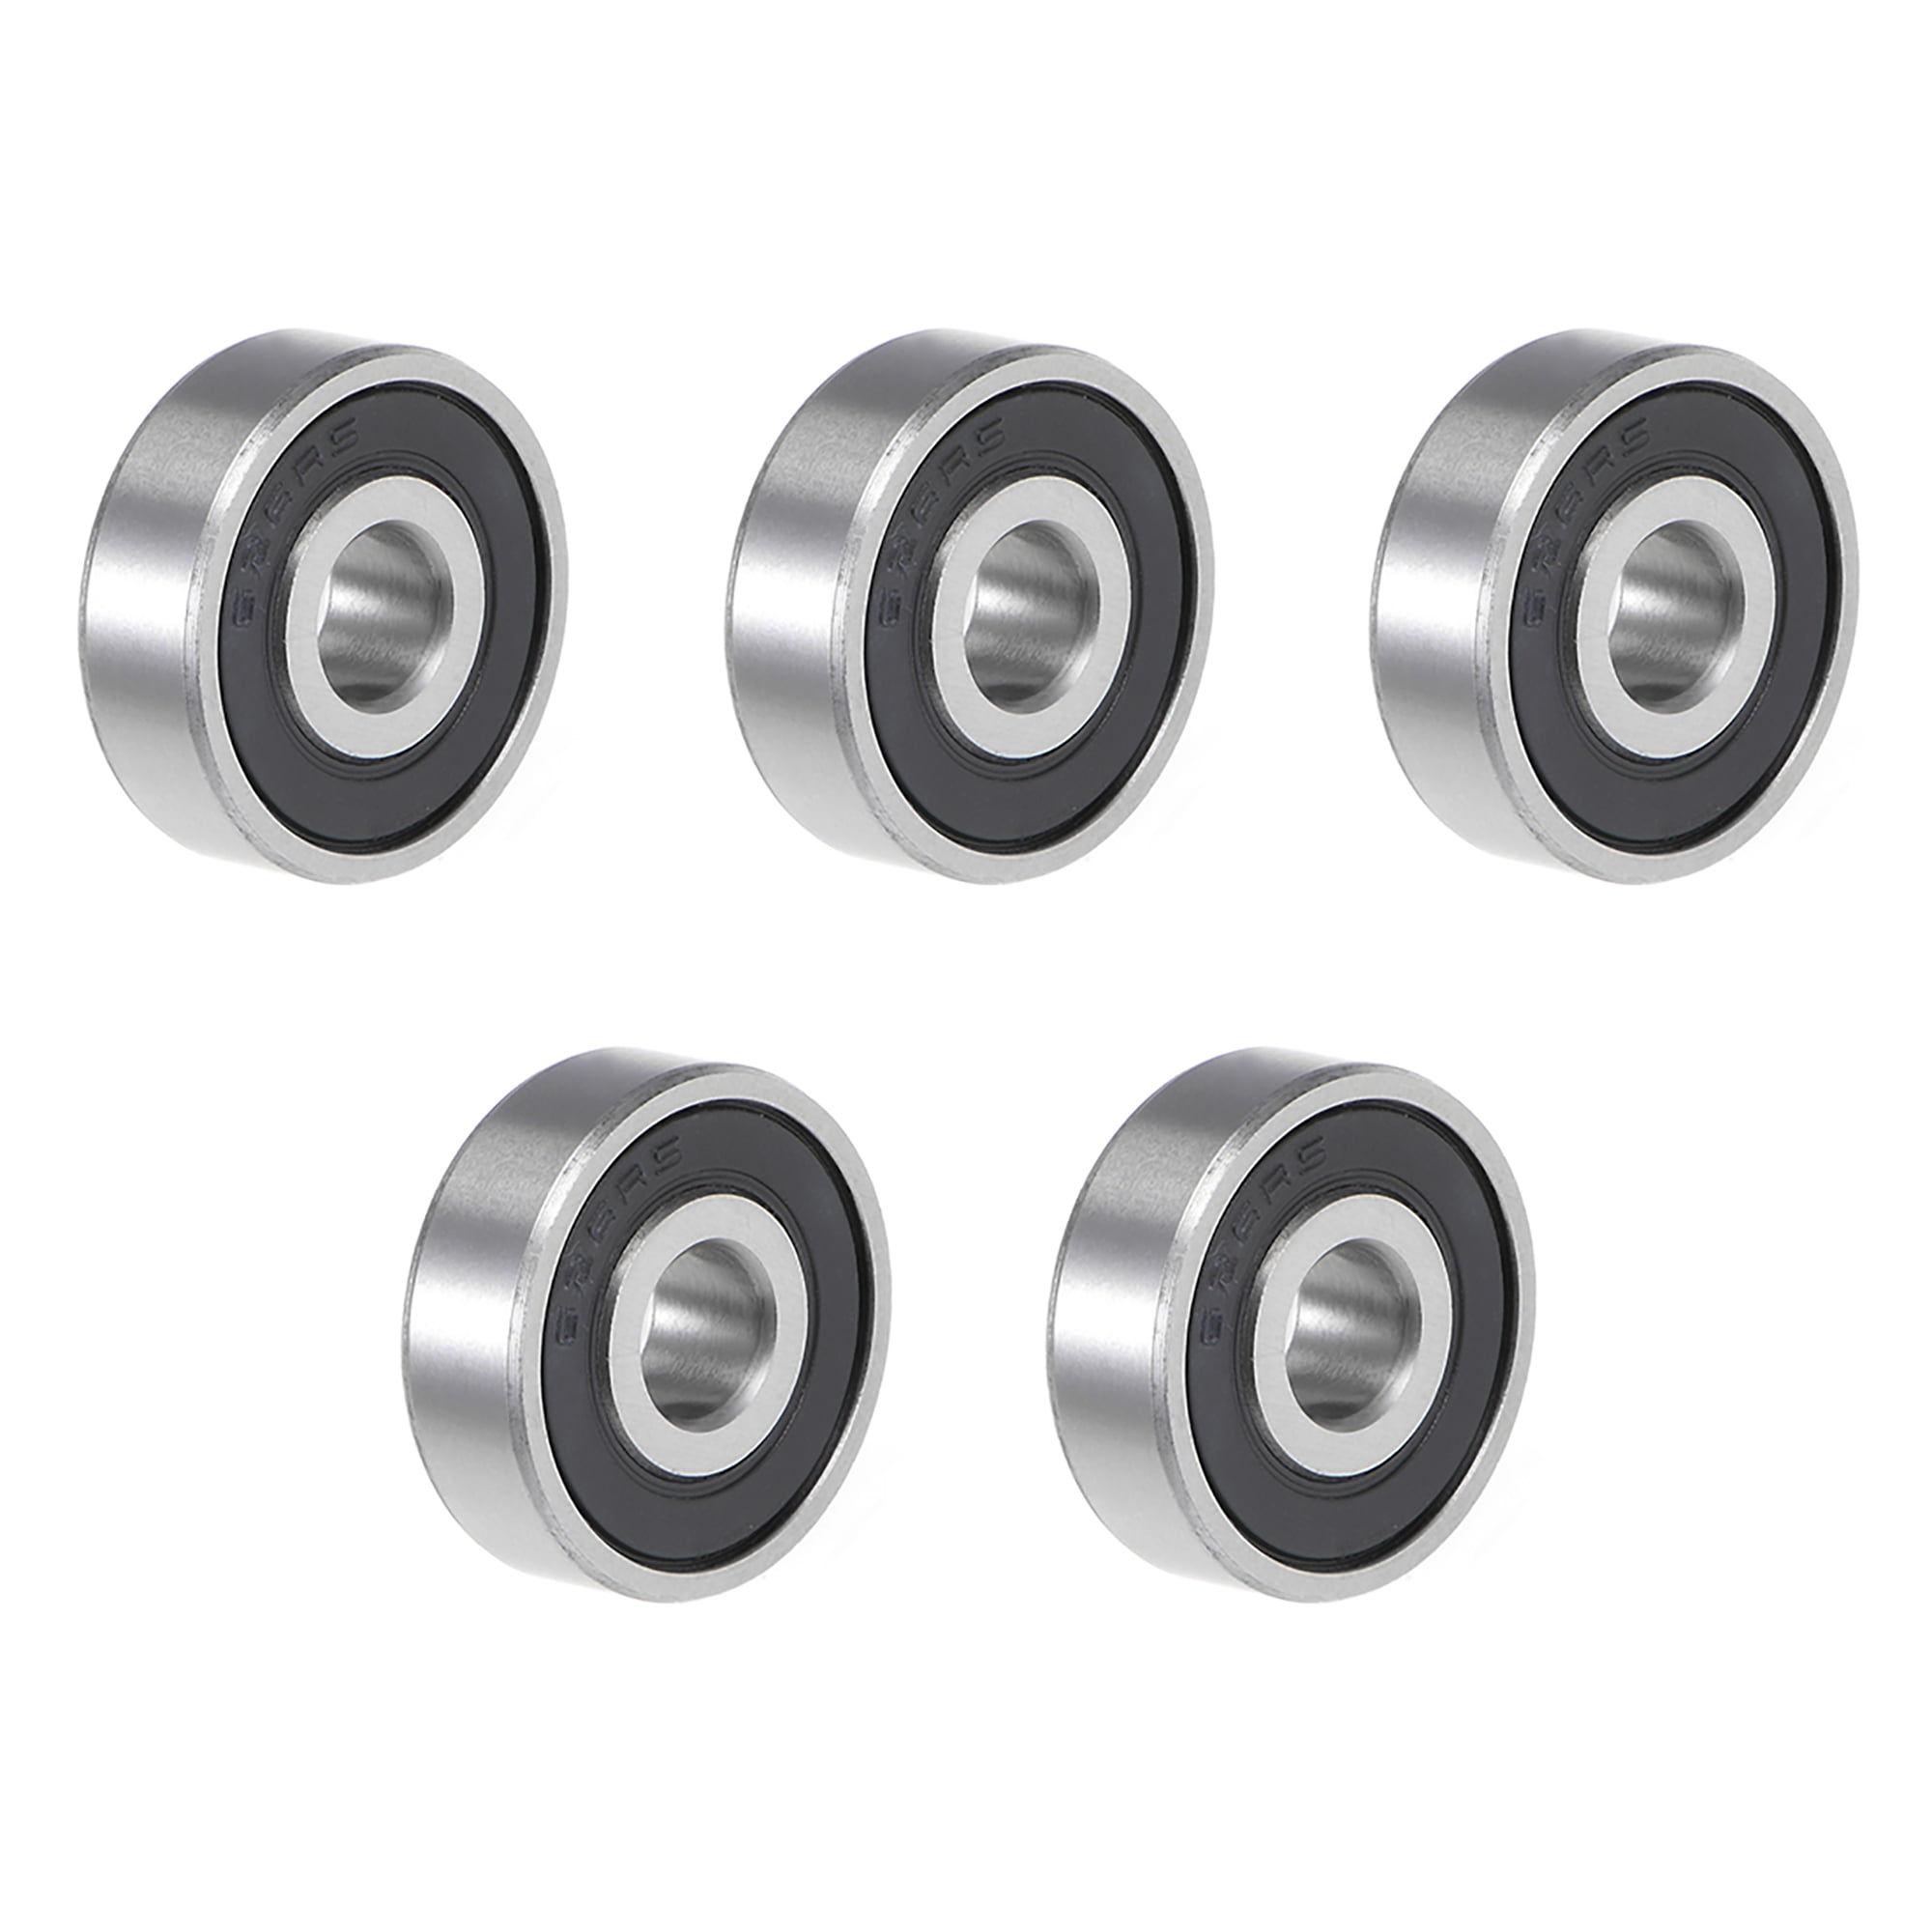 Details about   626-2RS Ball Bearing 6x19x6mm Double Sealed ABEC-3 Bearings 5pcs 